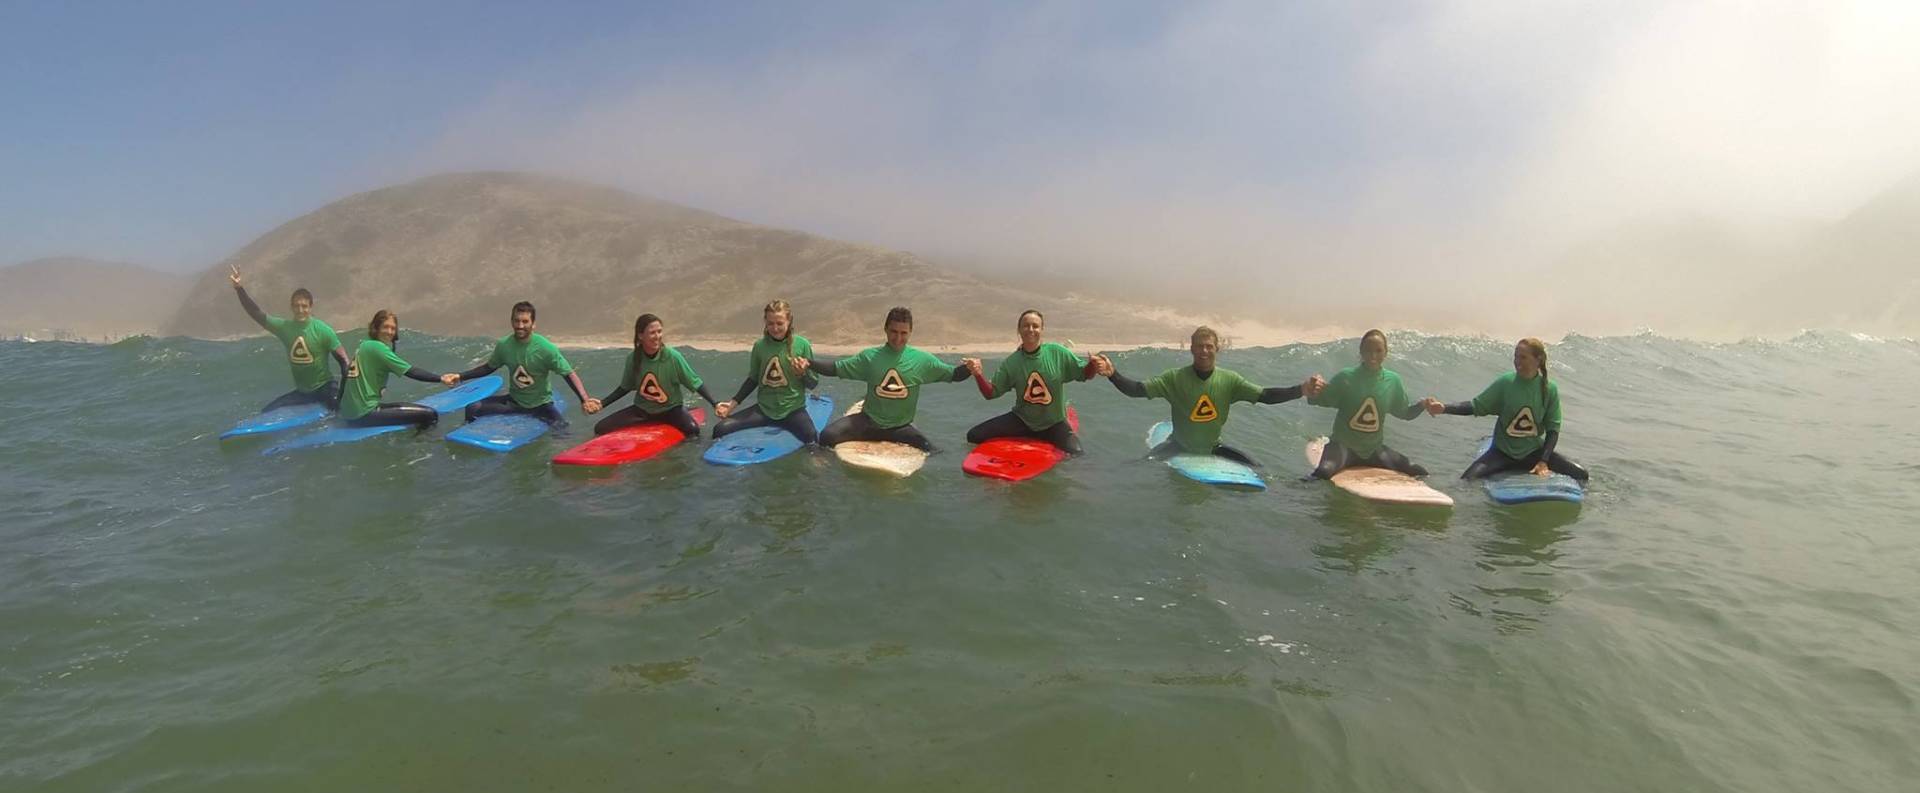 Welcome to the Sagres Surfcamp! Holding hands while waiting for the next wave!